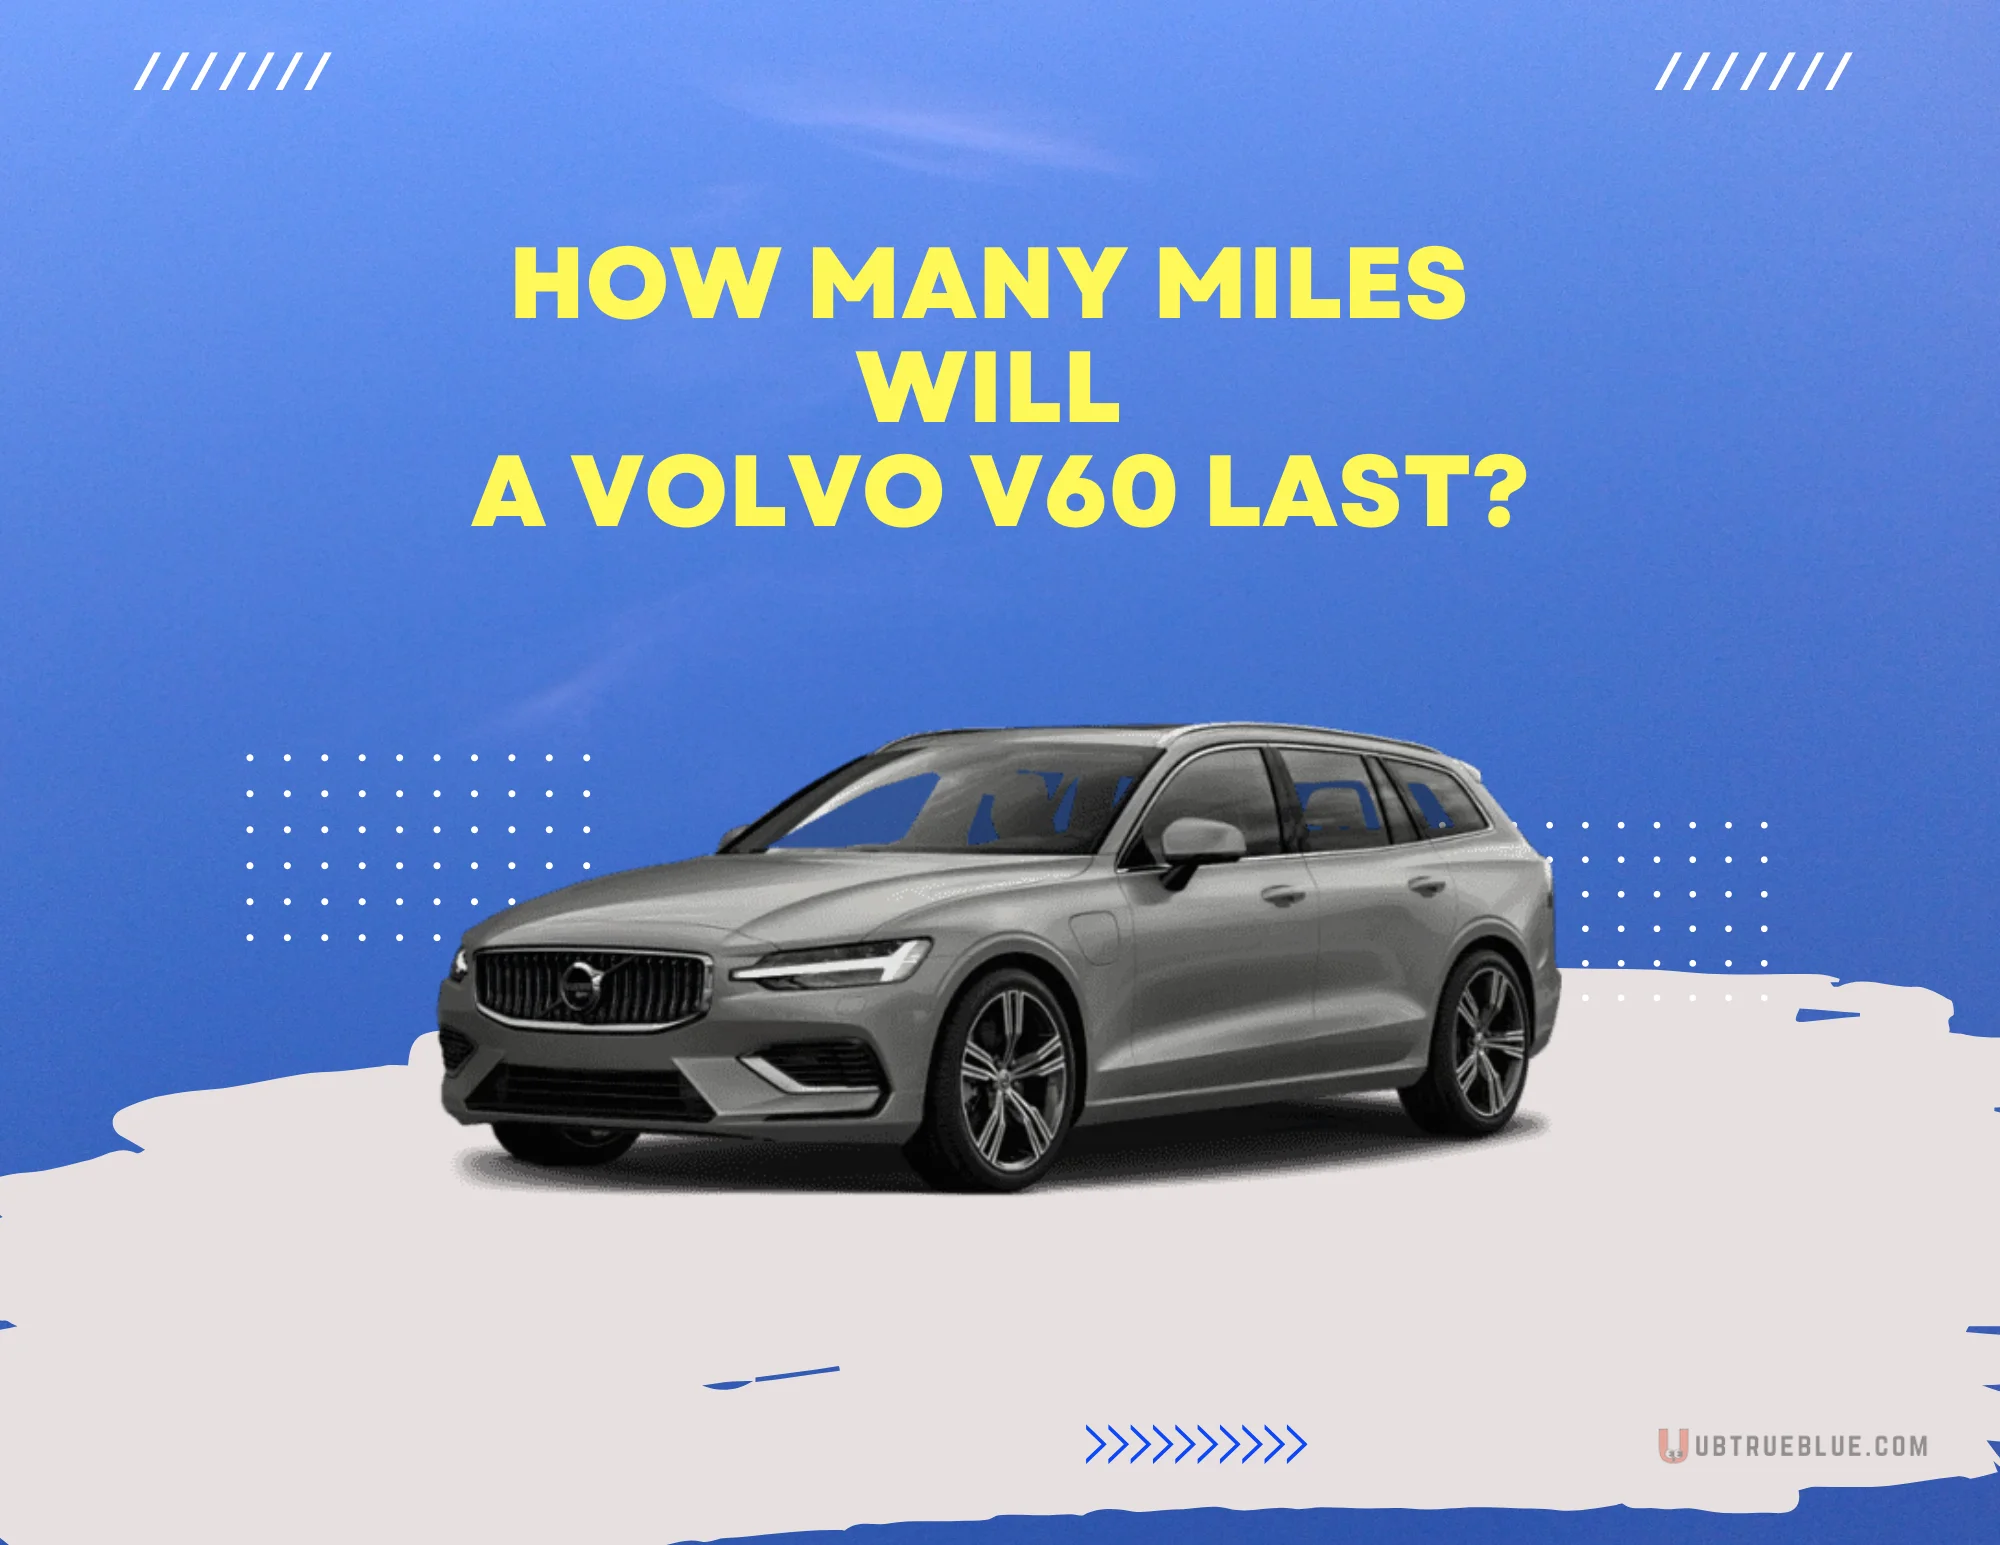 Volvo V60 Last Ubtrueblue Automotive How Many Miles Will A Last: Guide To Its Lifespan & Reliability Average Lifetime Mileage High Xc60 Xc90  Full